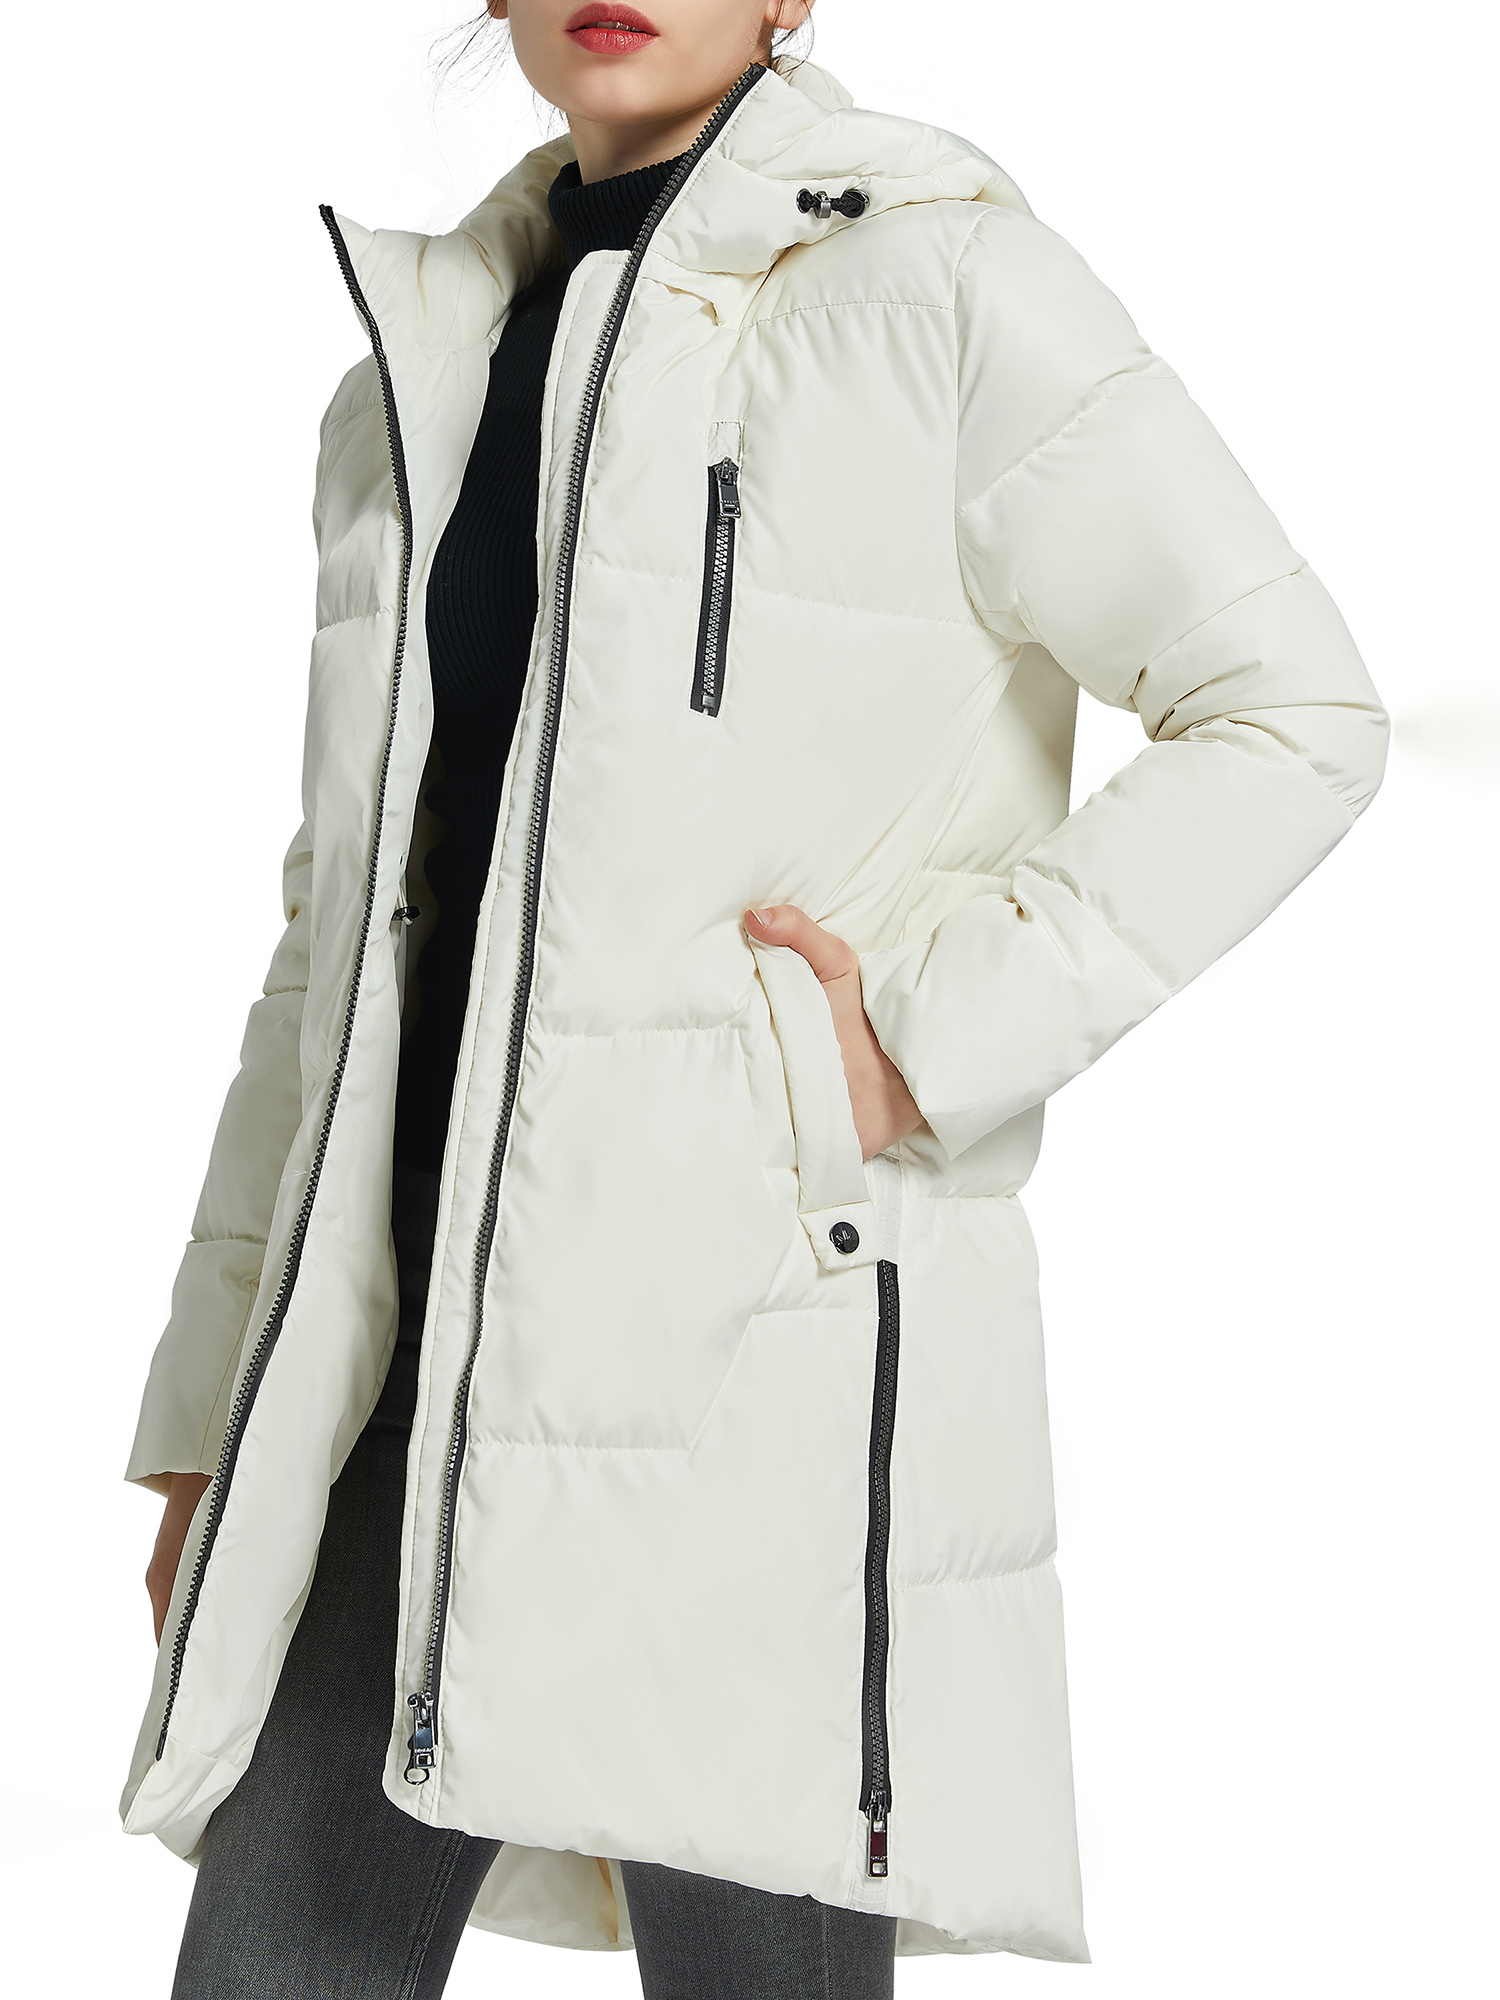 Orolay Women's Quilted Down Jacket Winter Down Coat Parka Coat with Hood Mid Lrngth Down Parka White XS - image 3 of 5